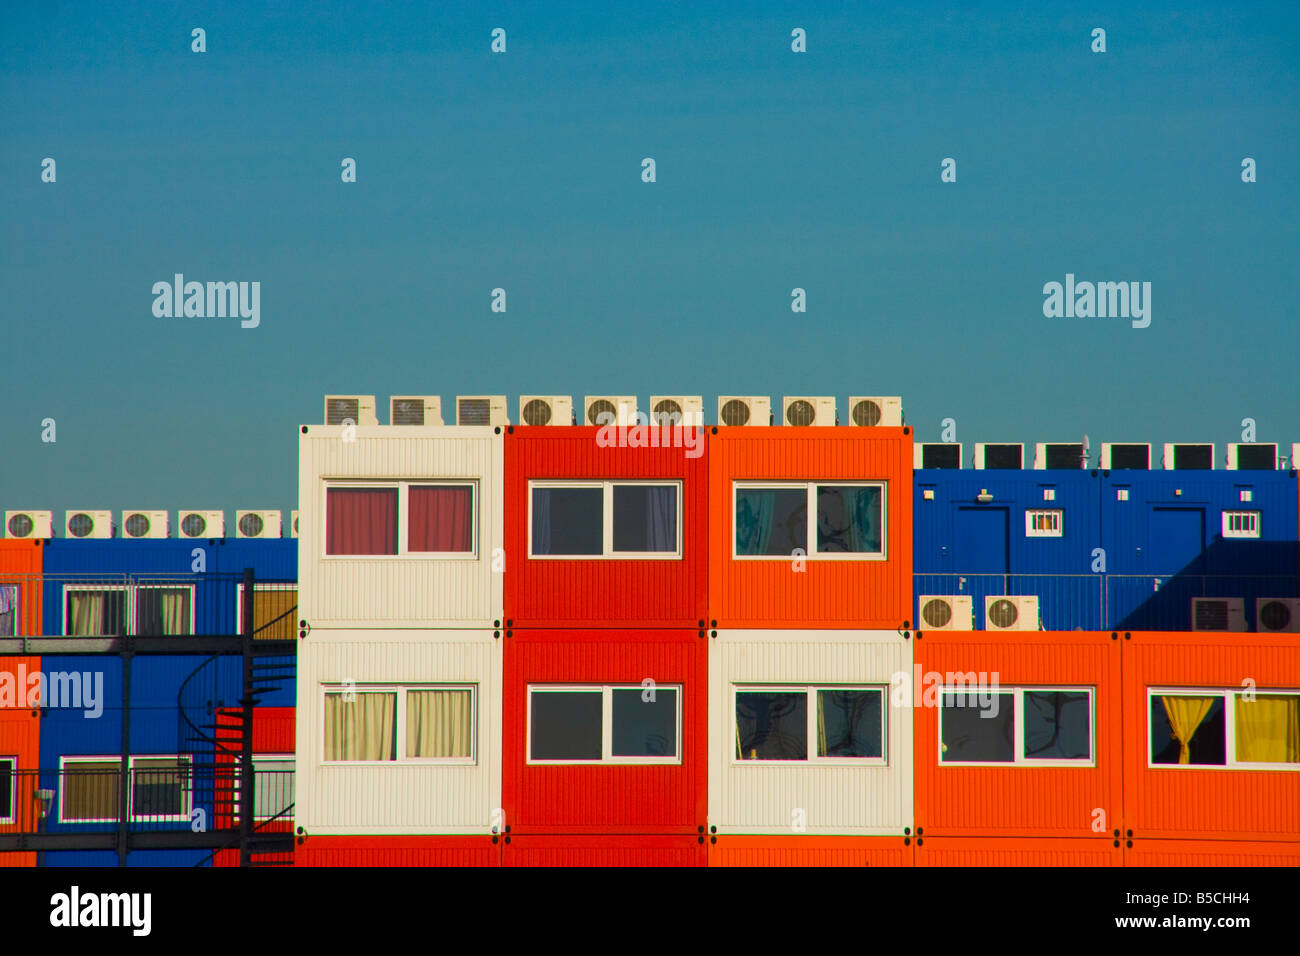 Student Housing in Shipping Containers Amsterdam North Stock Photo